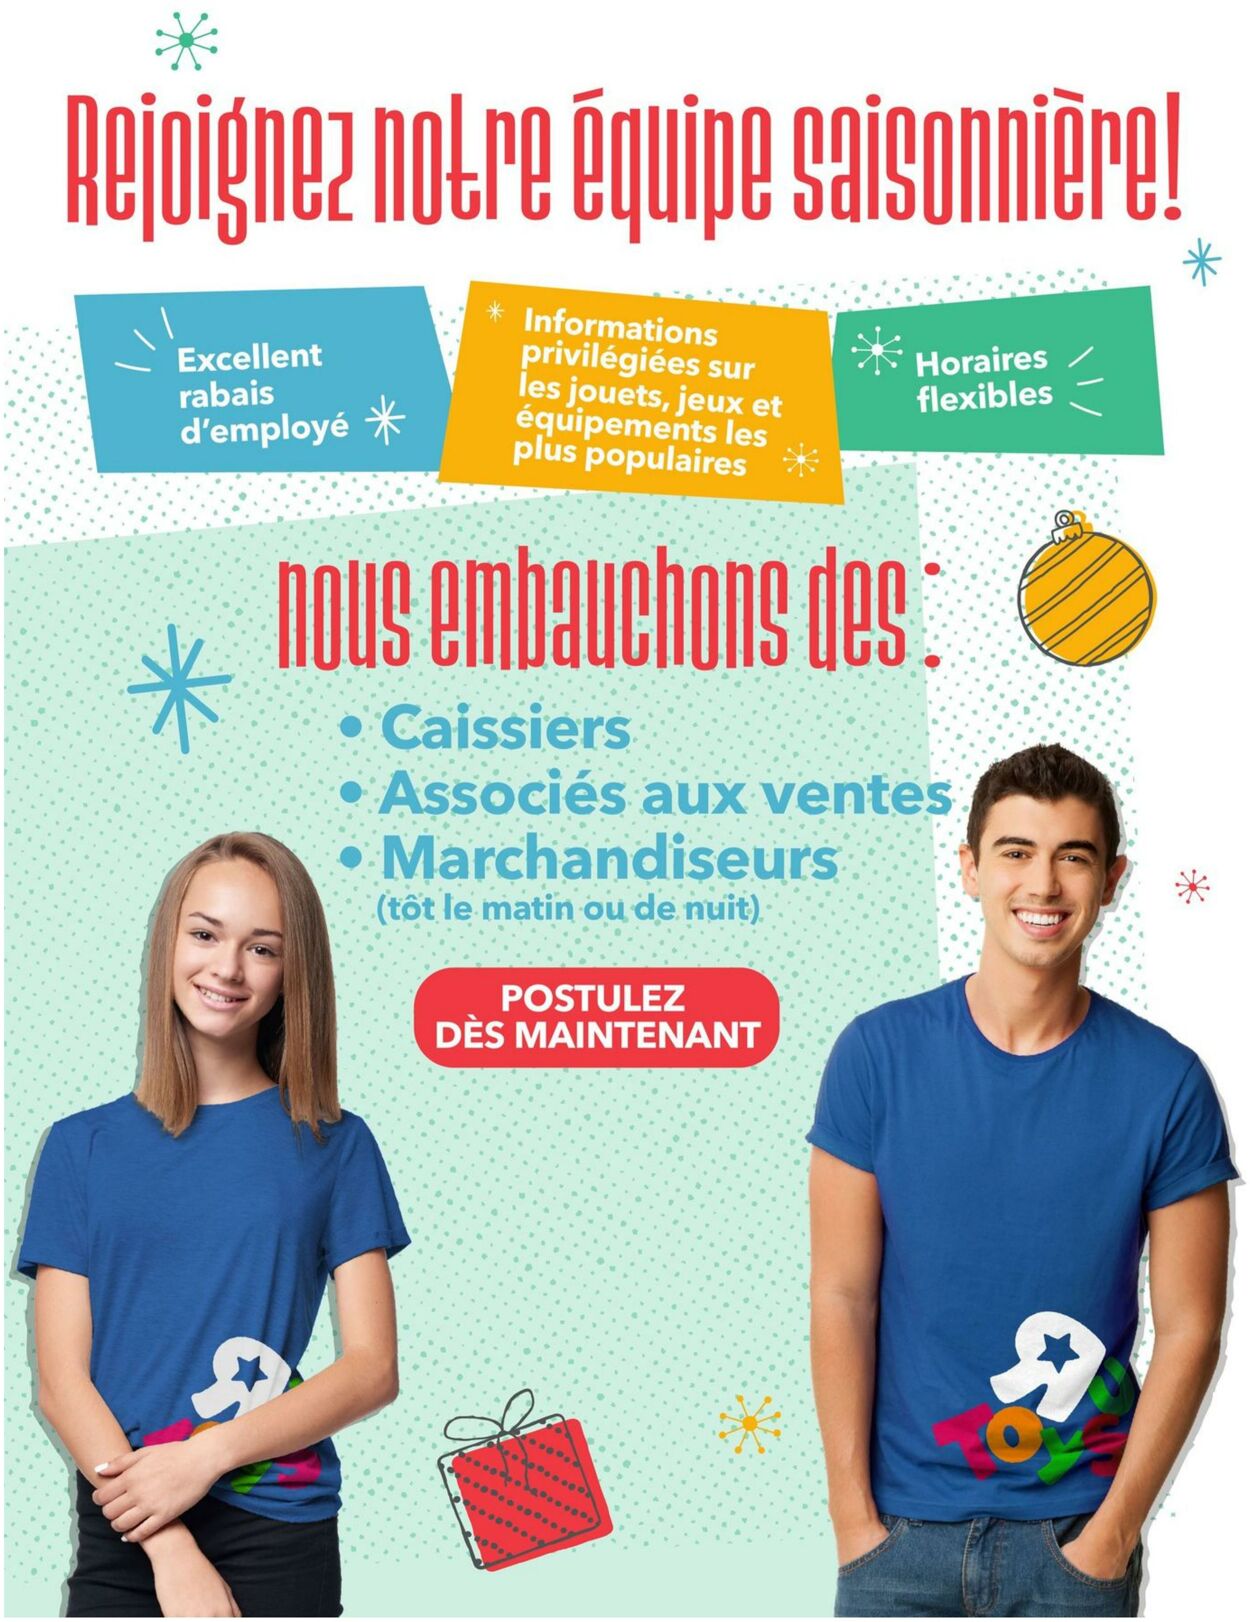 Circulaire Toys’R’Us 14.10.2021 - 27.10.2021